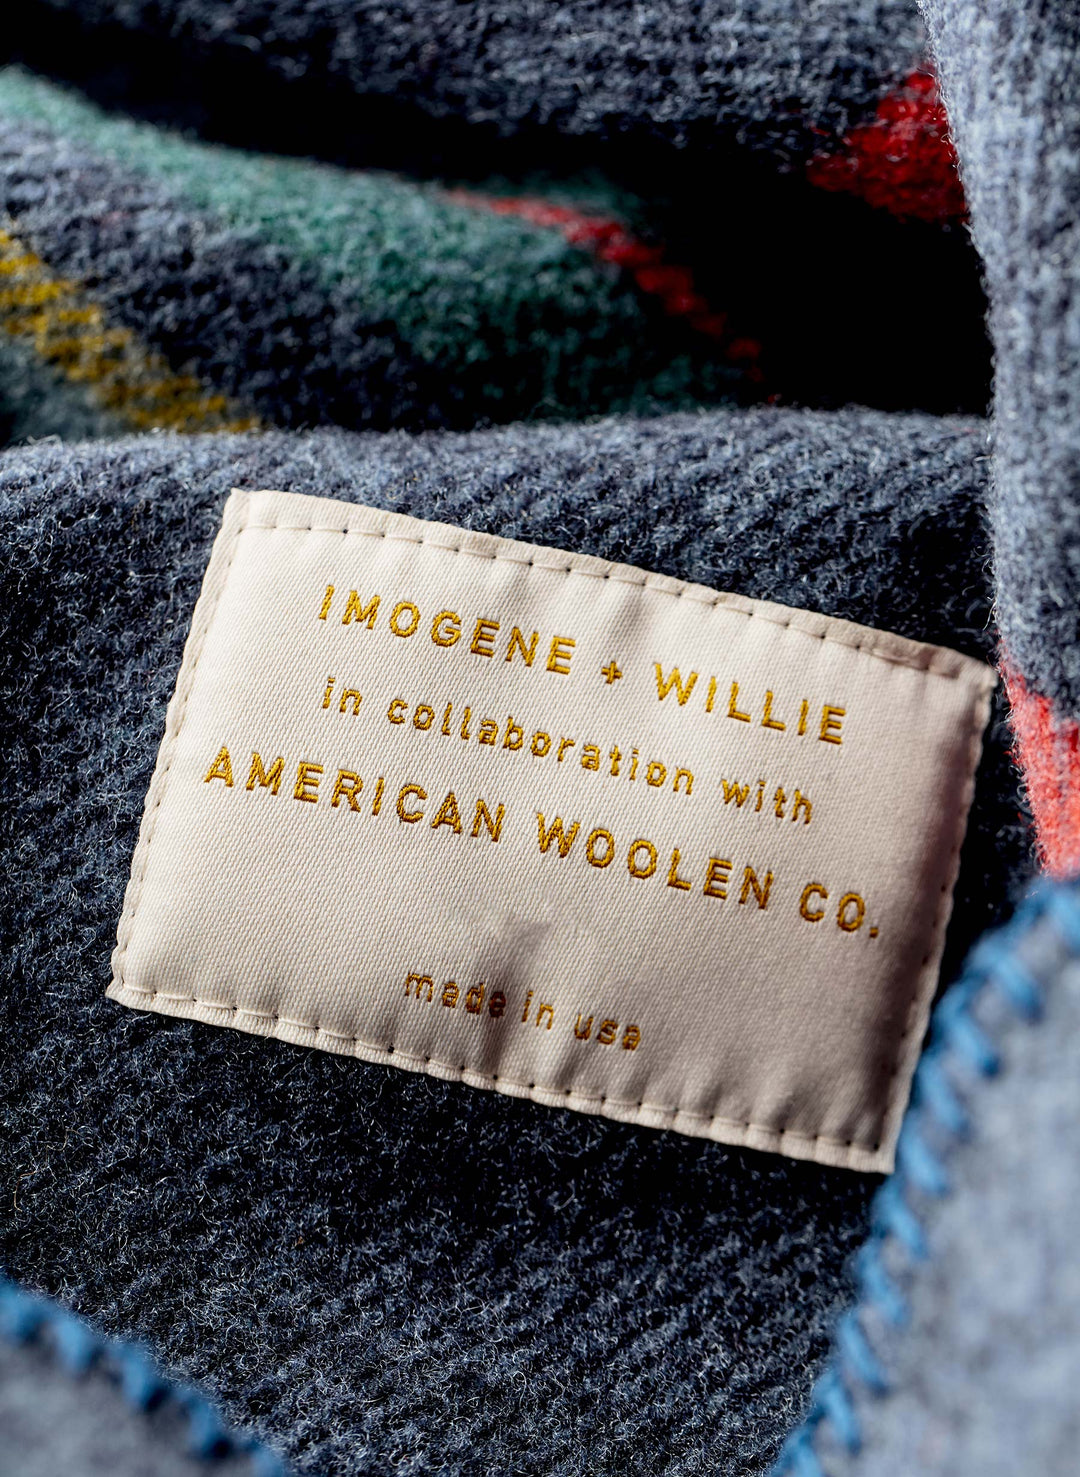 a label on a fabric